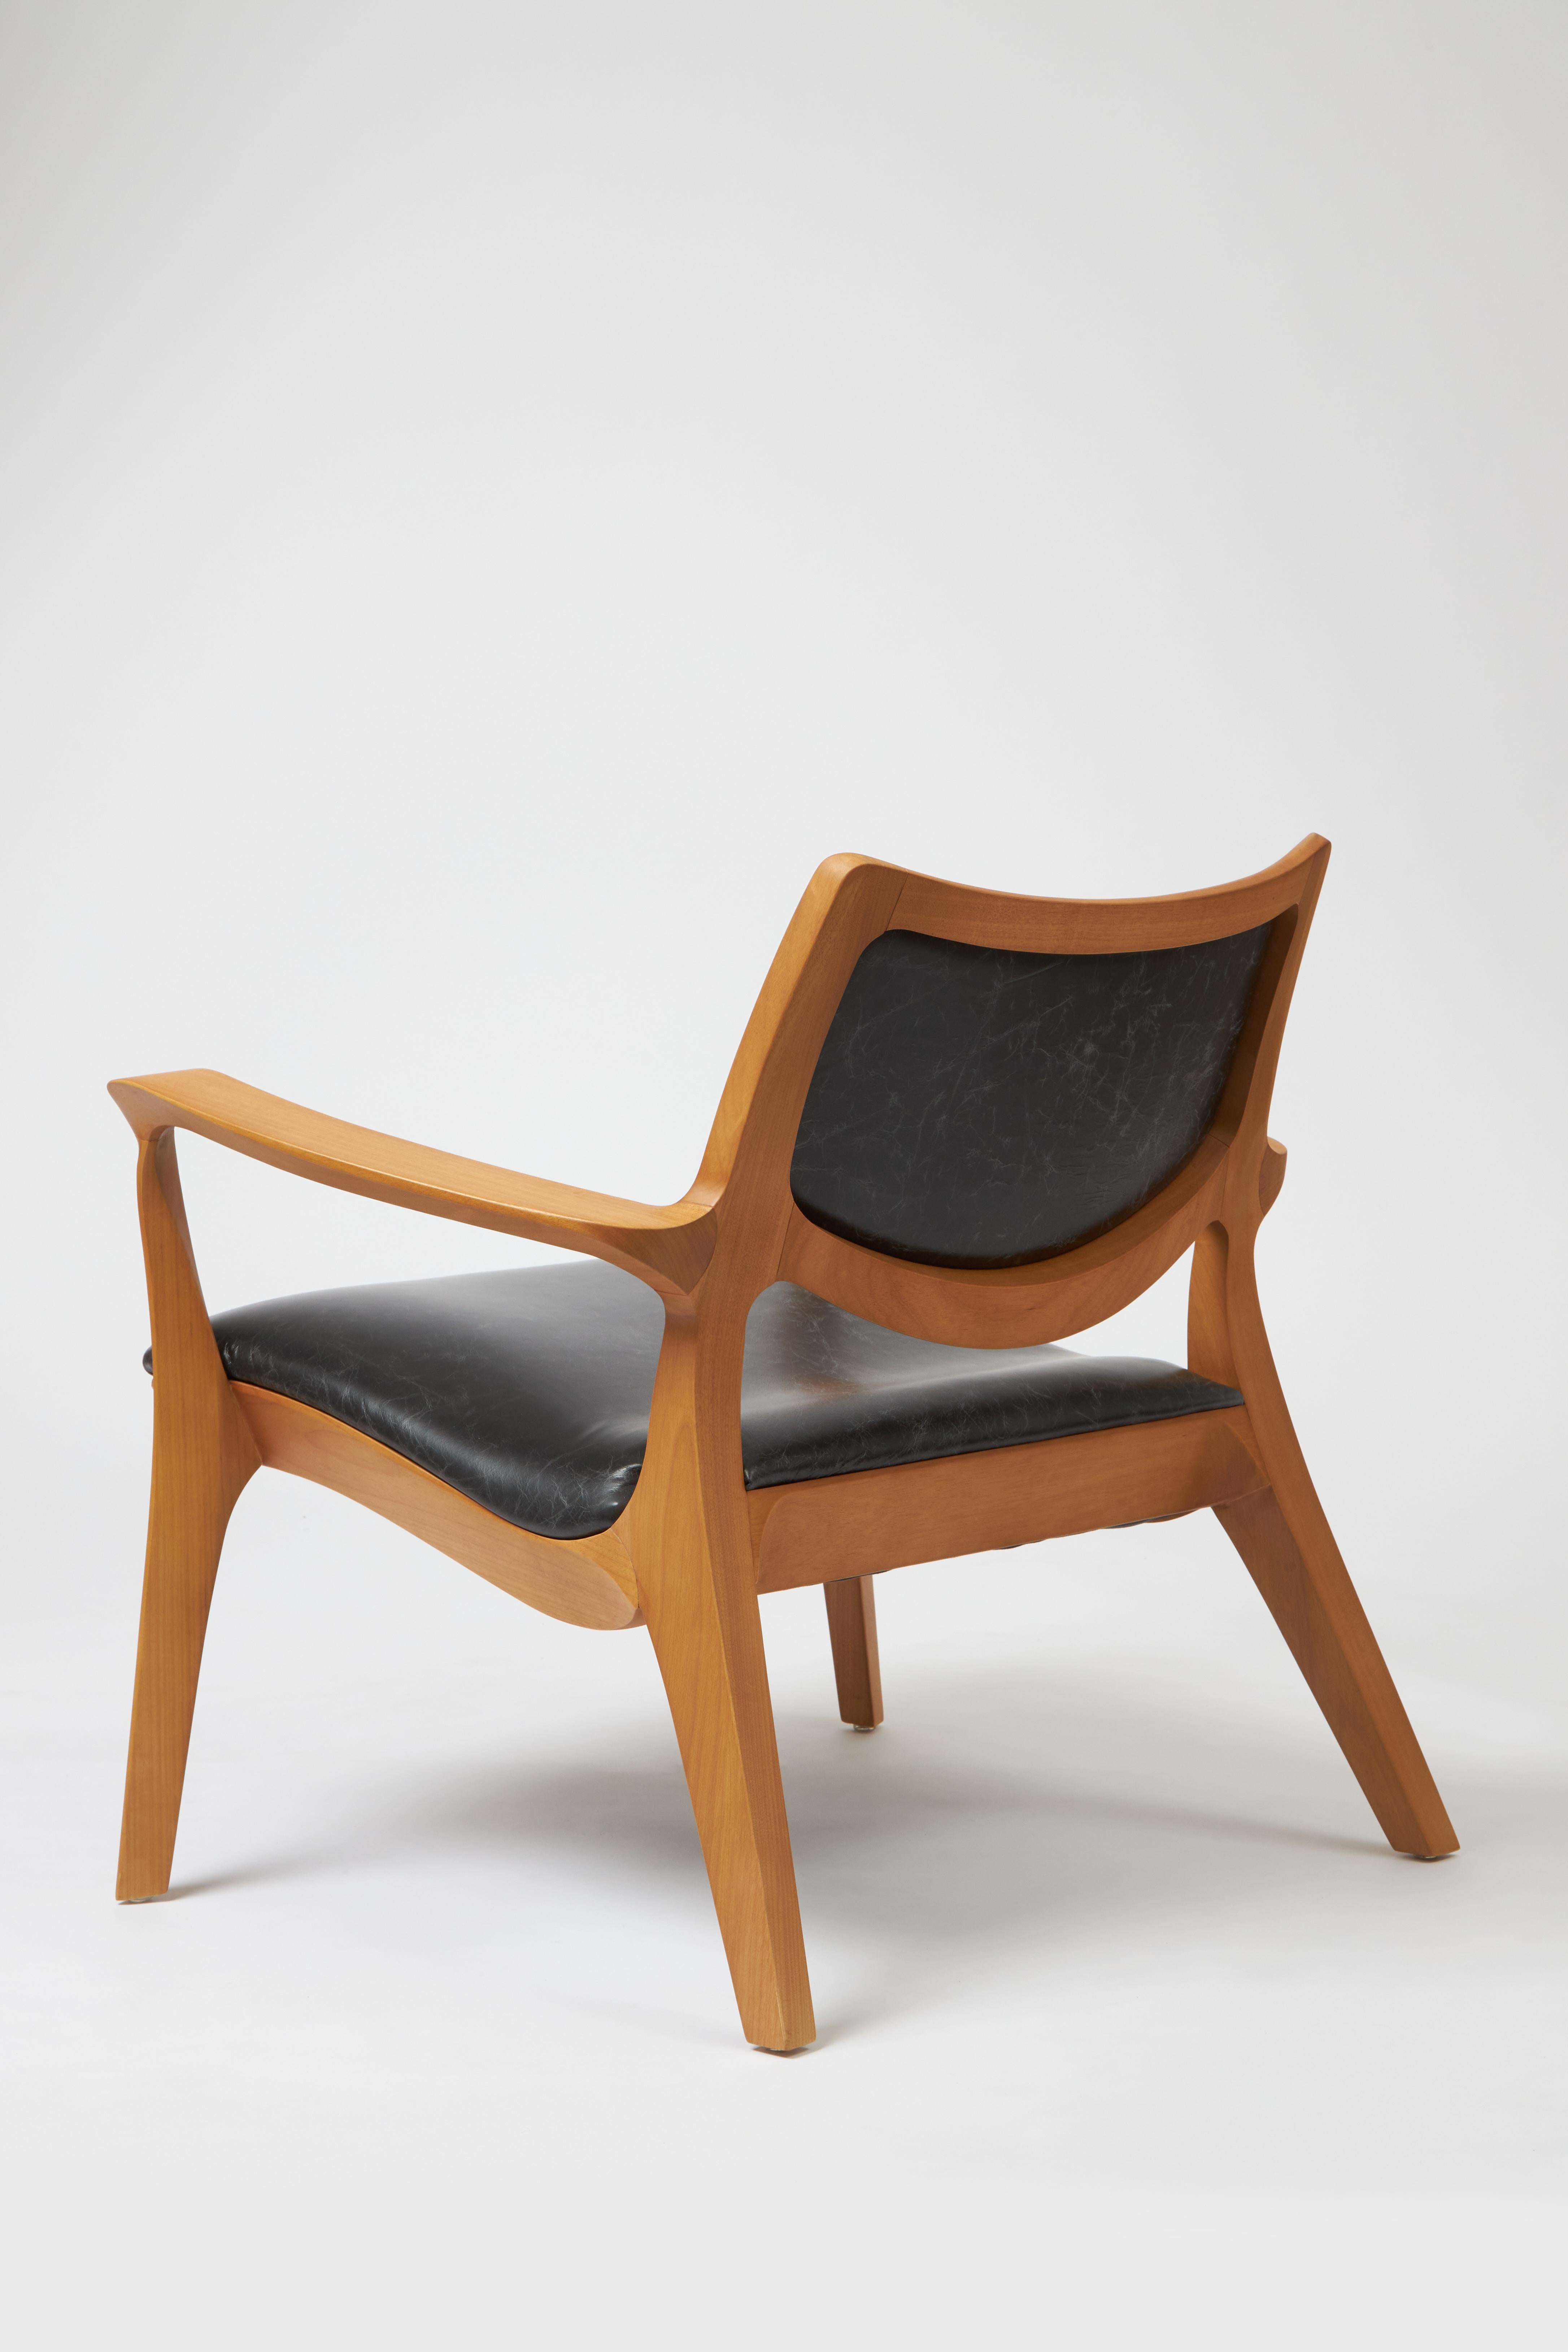 Caning Modern Style Aurora armchair Sculpted in solid wood, leather seat and back For Sale